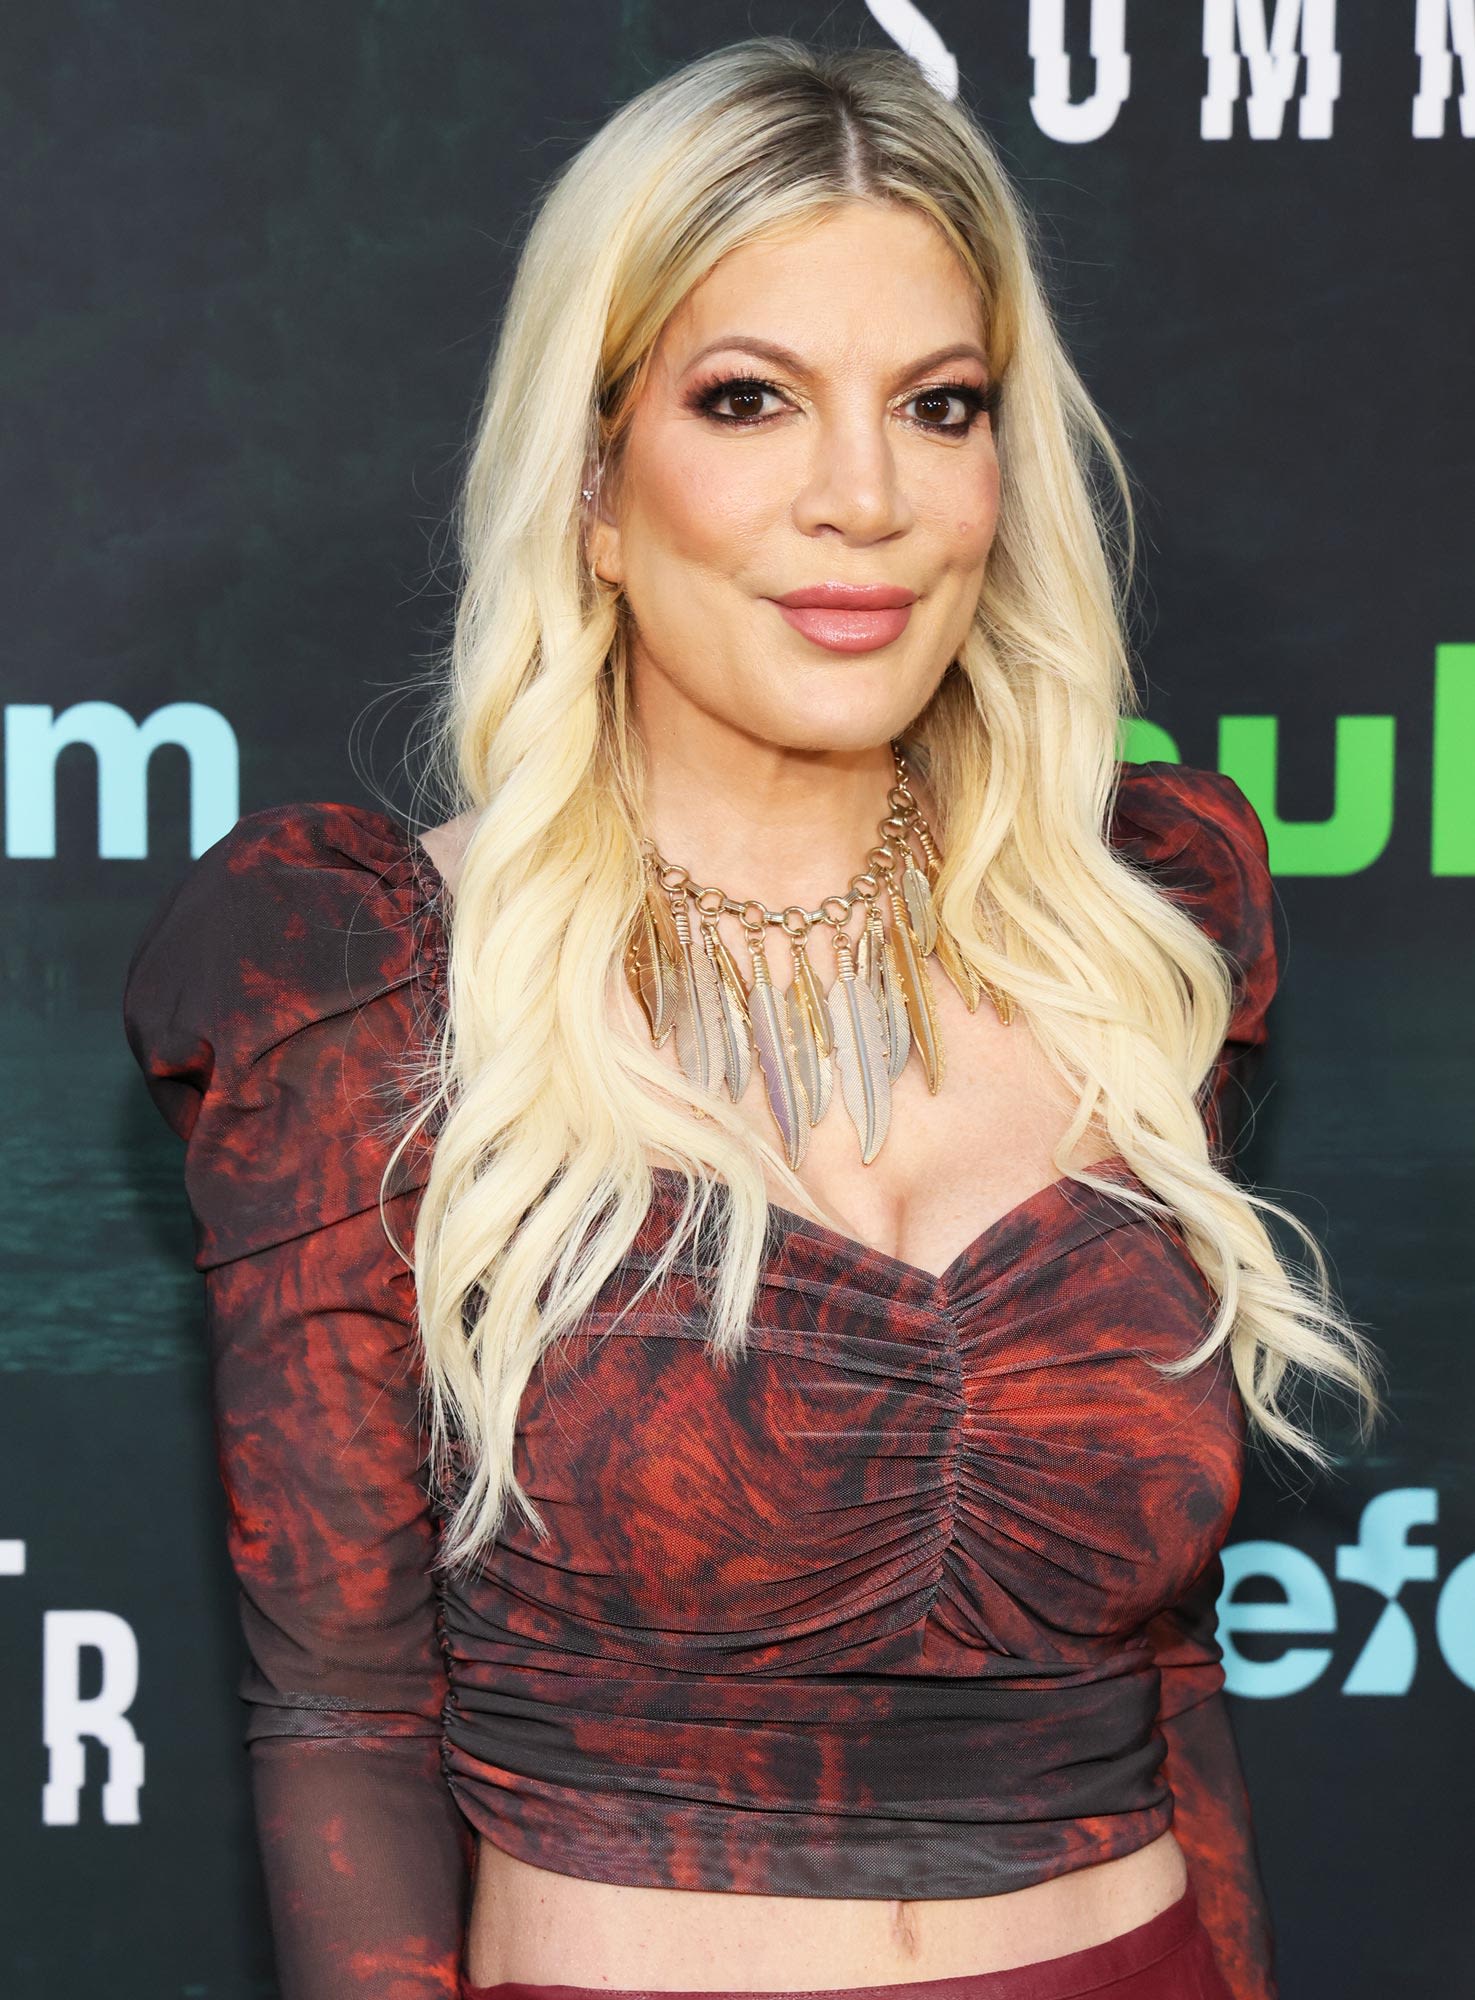 Tori Spelling Shares Why She Got Veneers: ‘My Smile Used to Be My Thing When I Was Young’